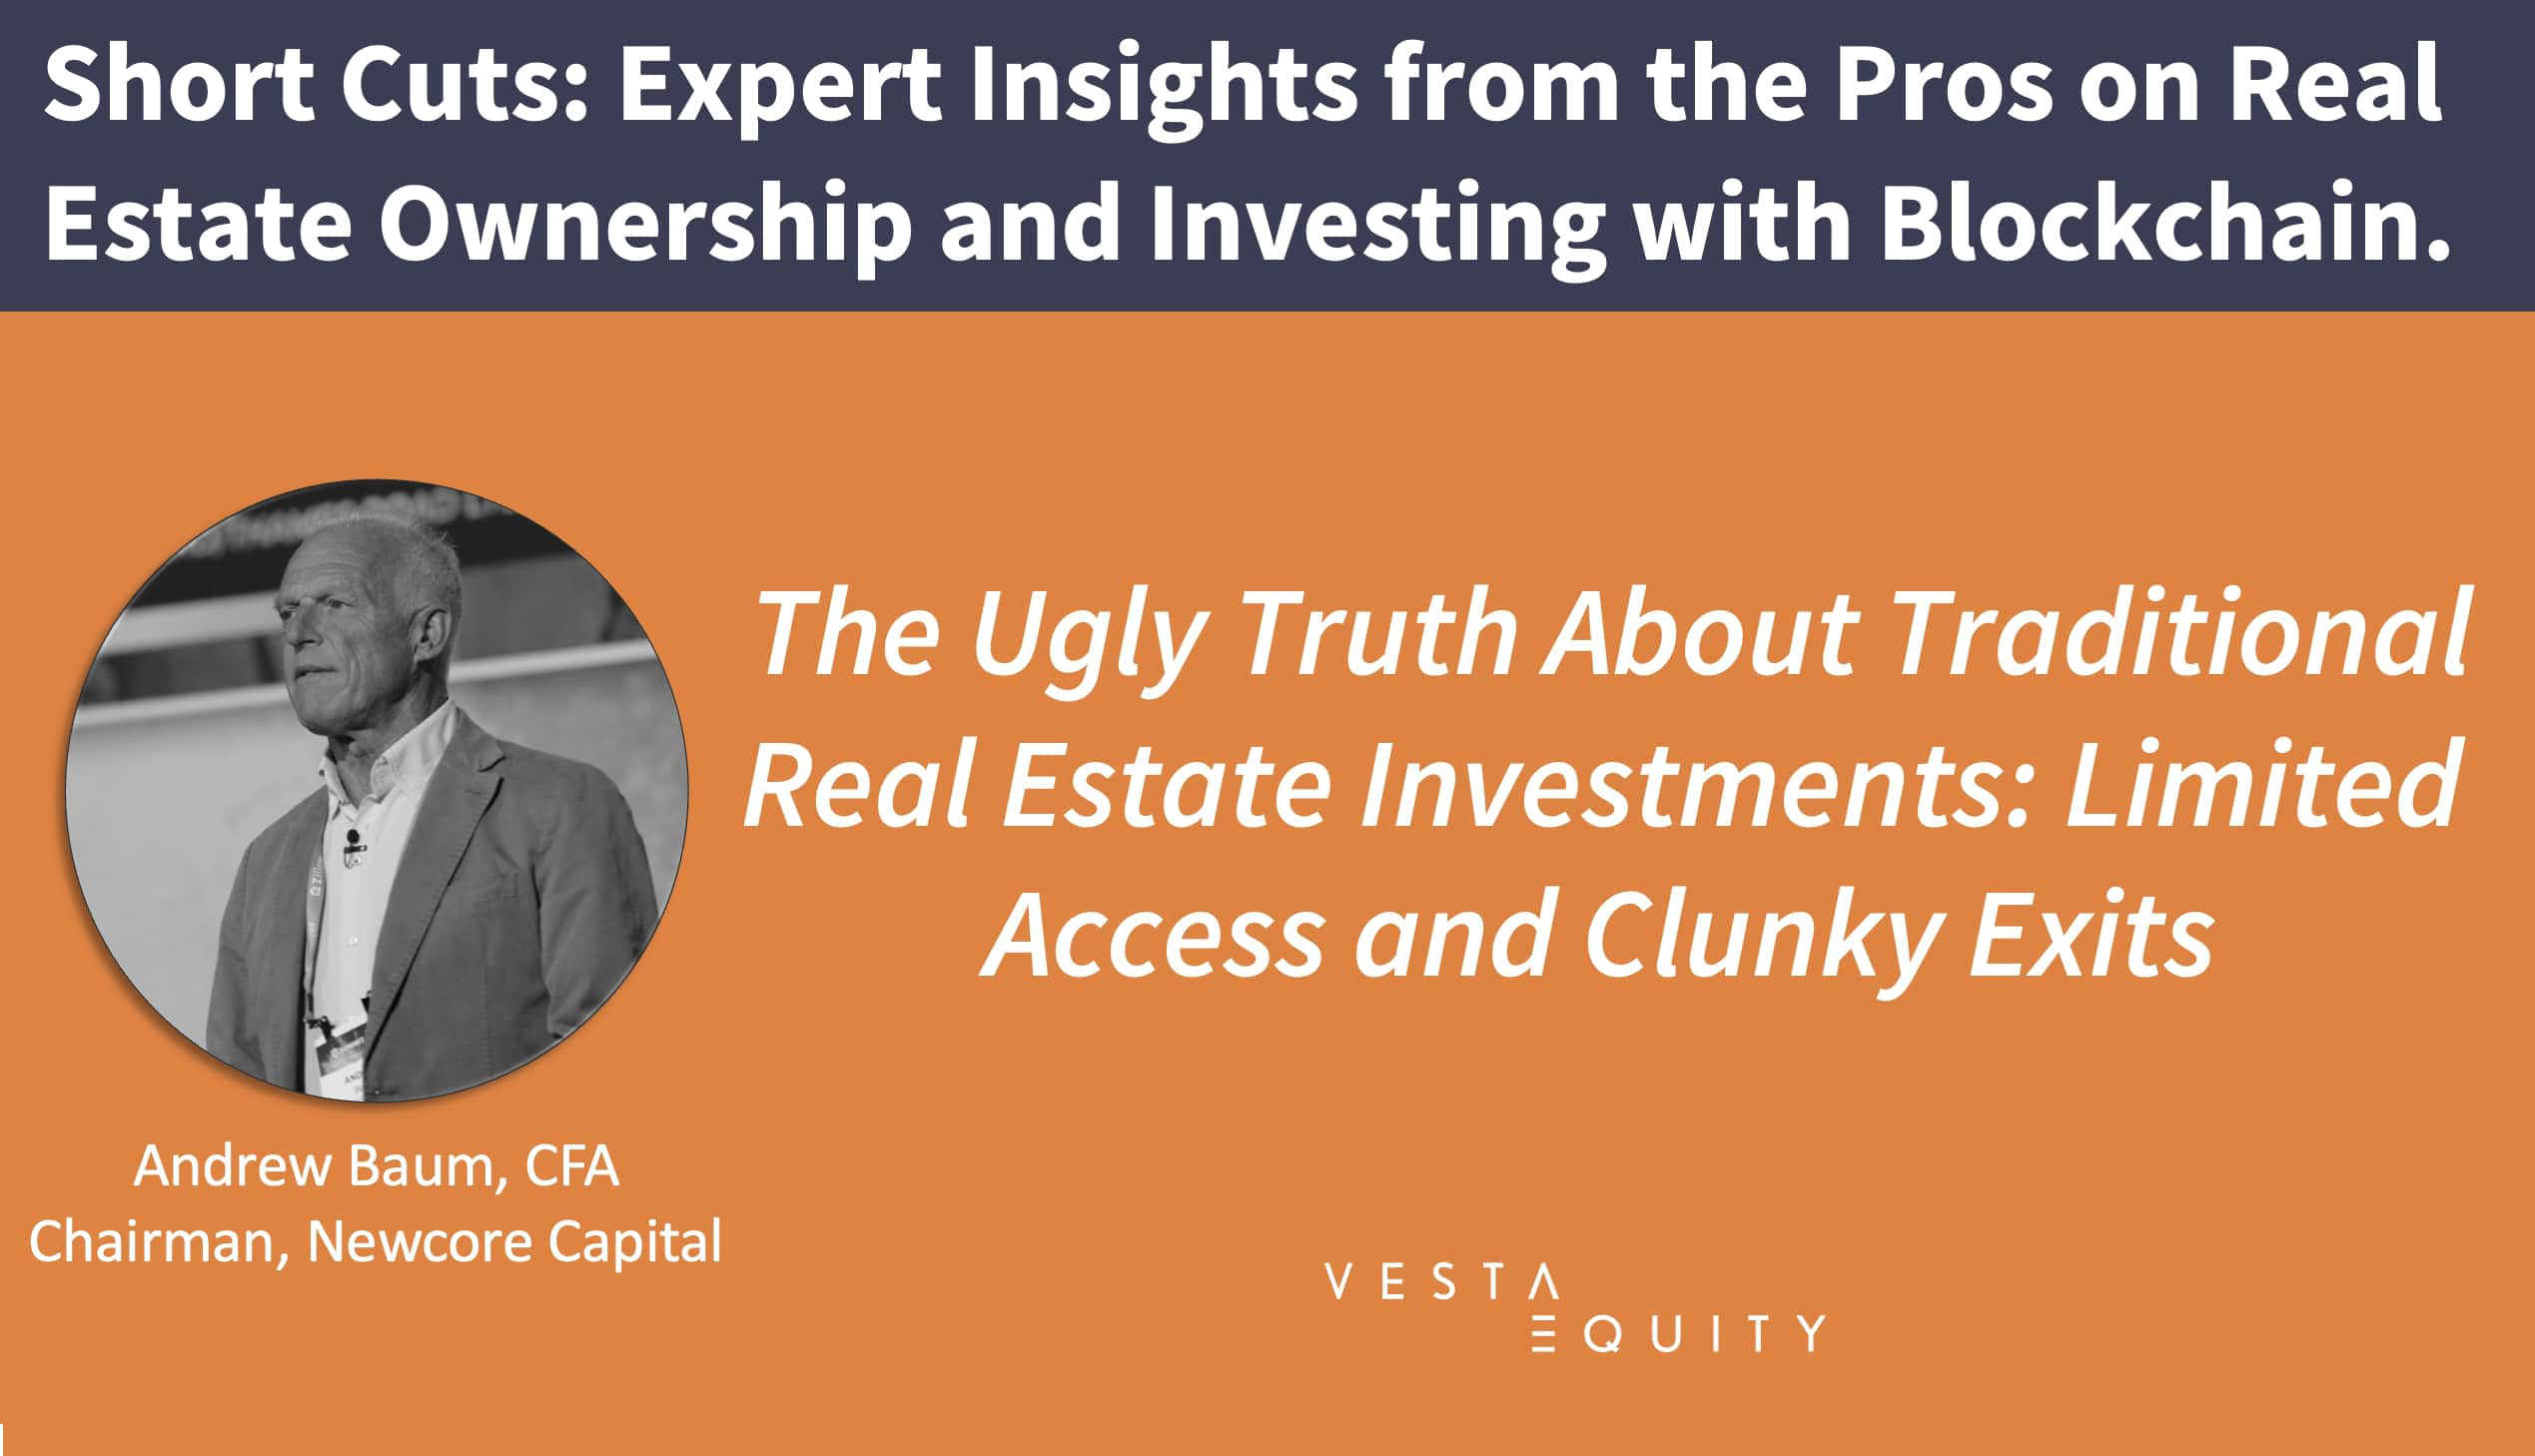 The ugly truth about traditional real estate investments: limited access and clunky exits with Andrew Baum CFA, Chairman of Newcore Capital.